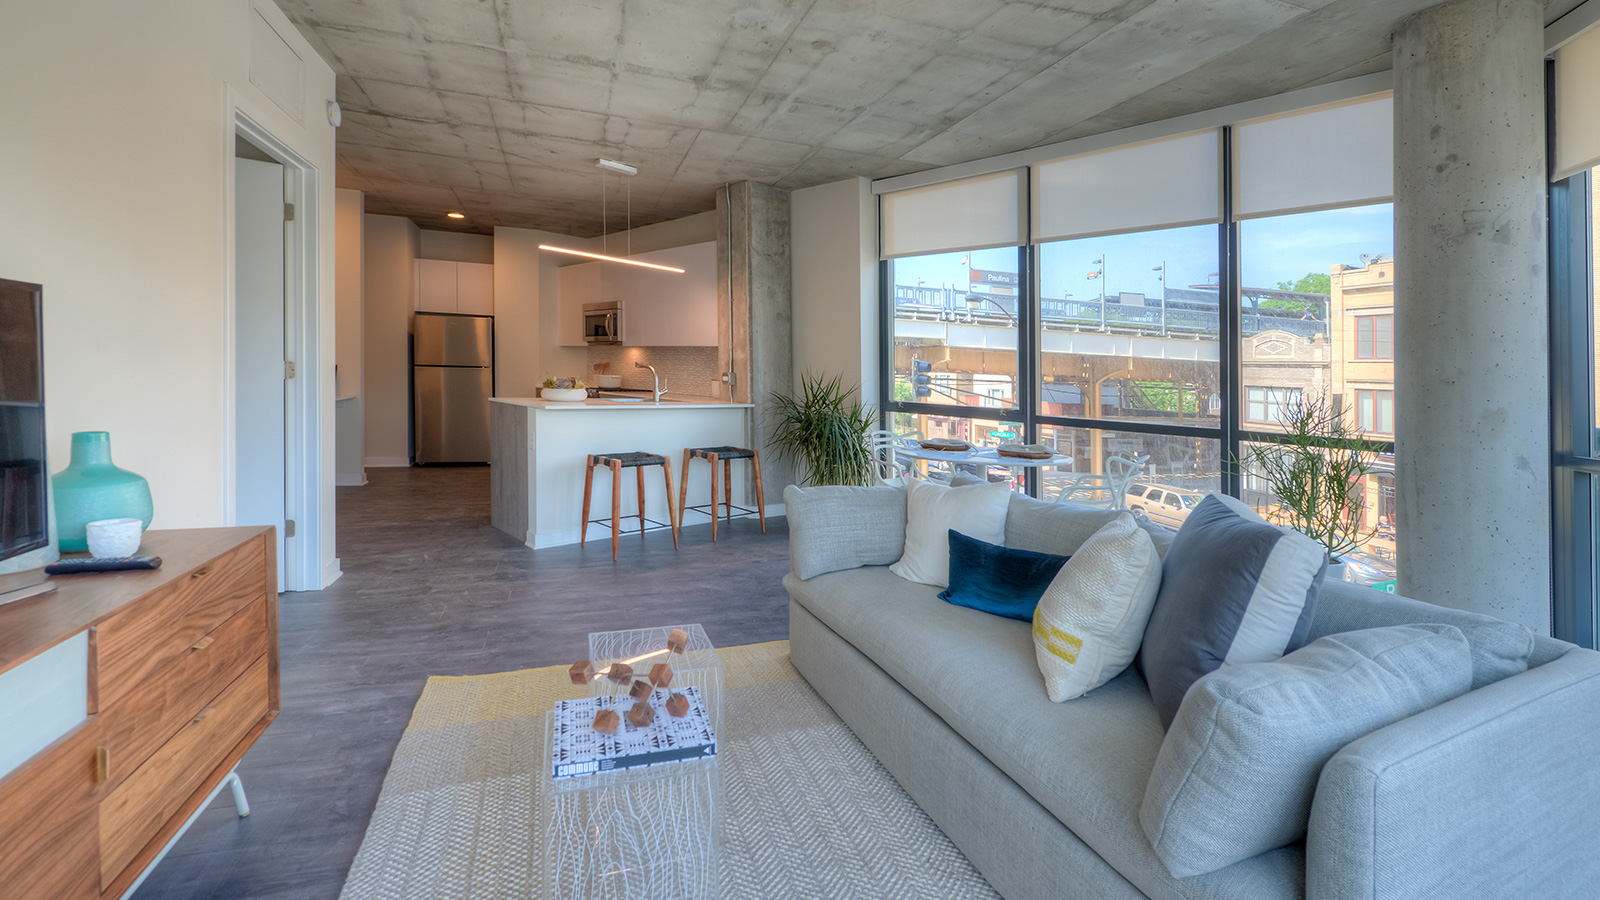 Looking for luxury apartments for rent near downtown Chicago's Lakeview neighborhood?